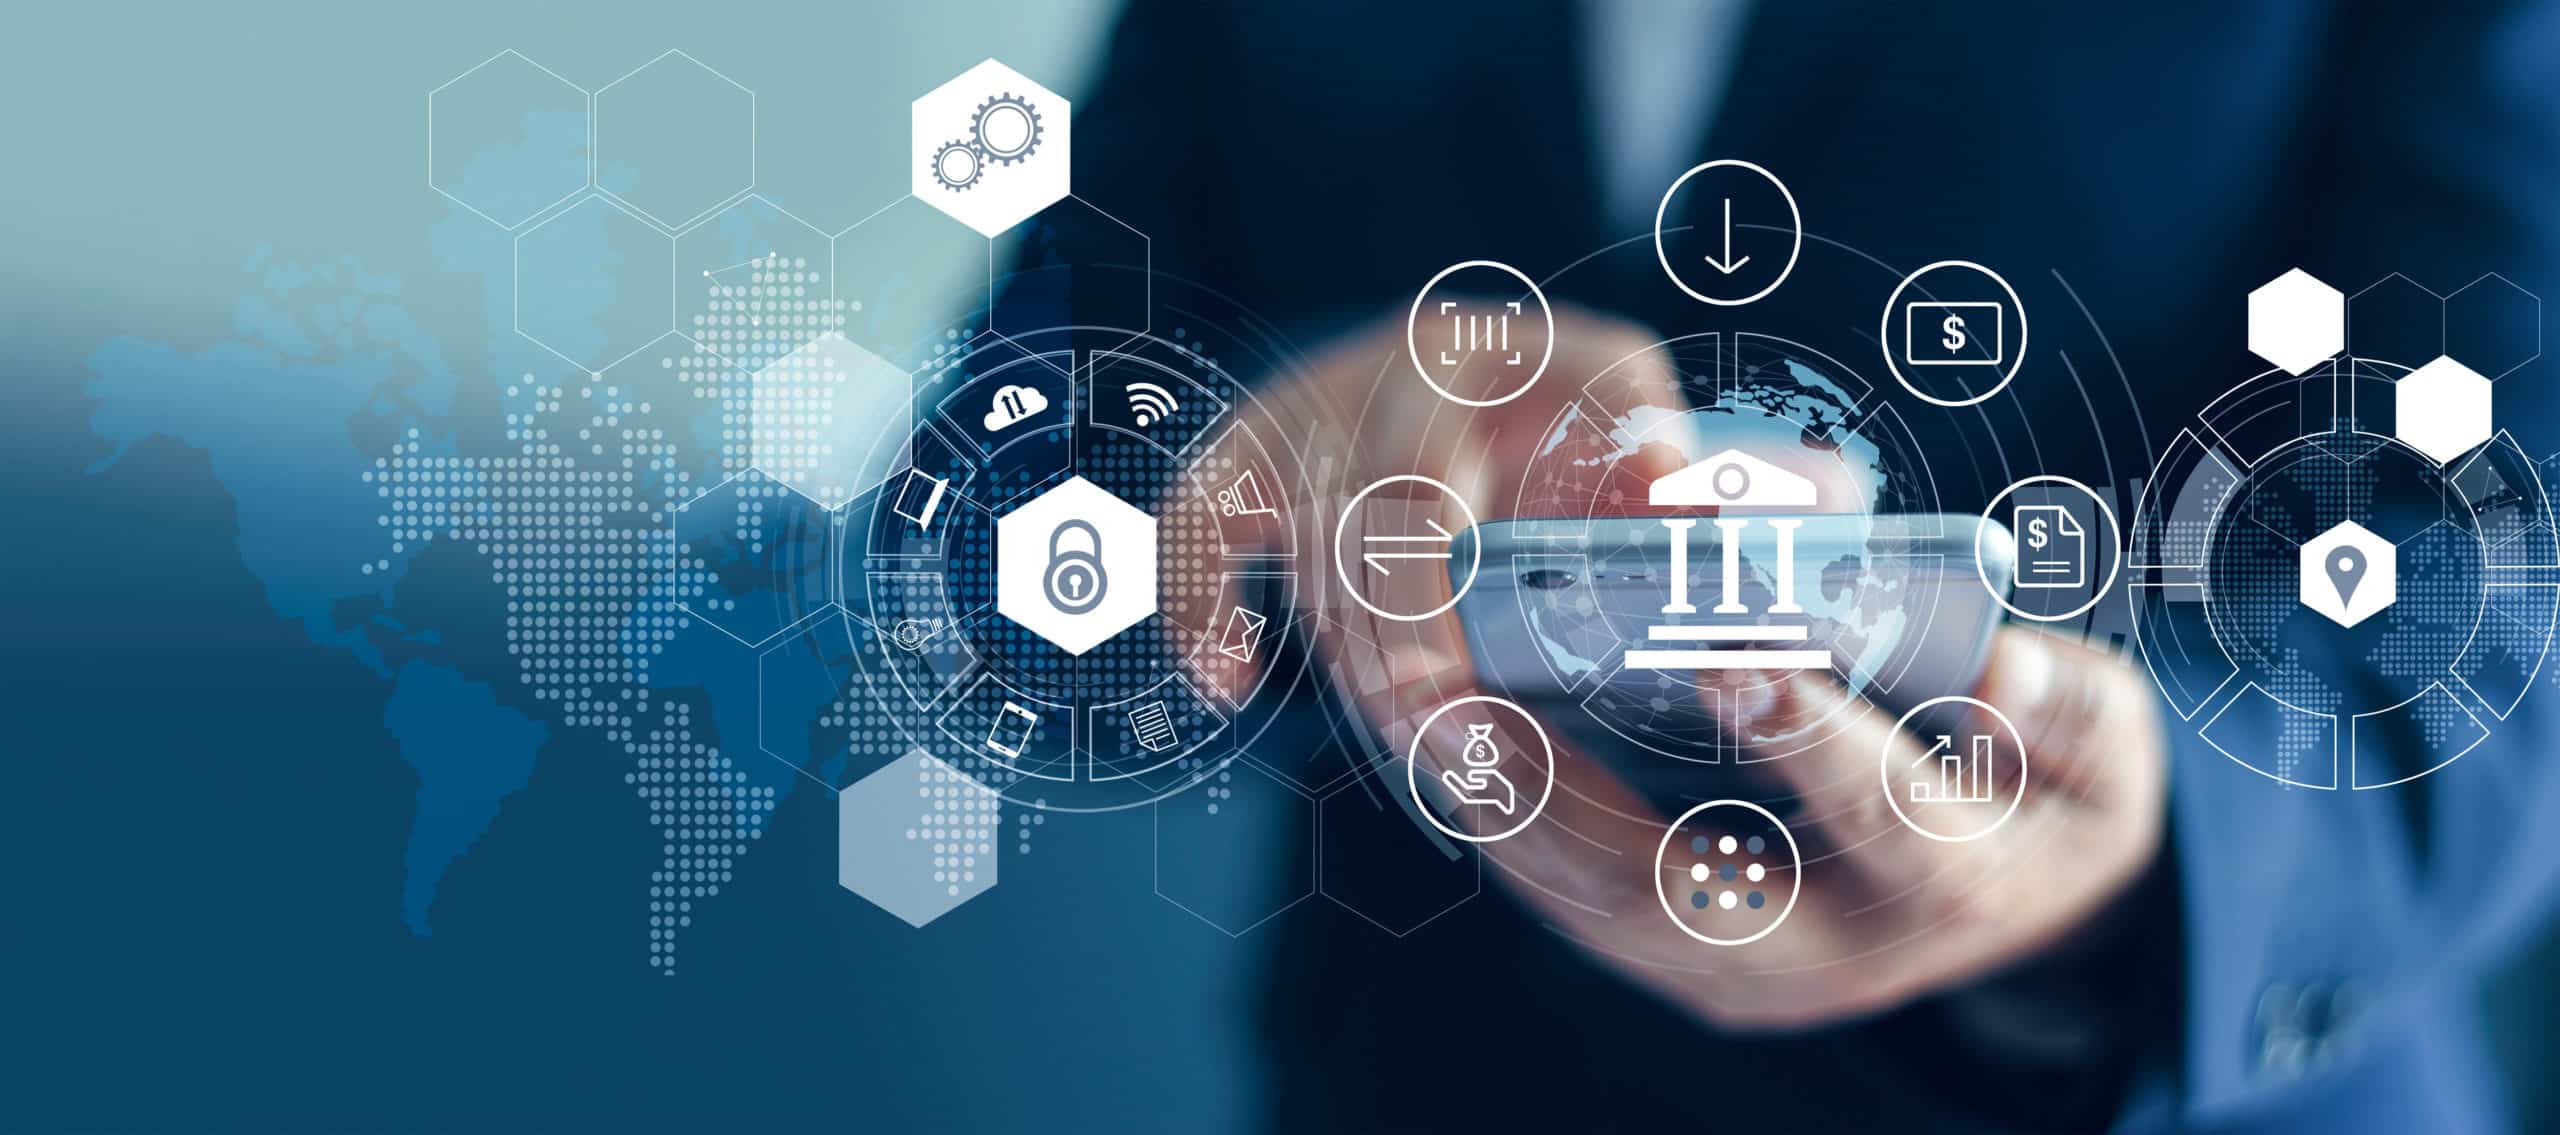 5 Growing Trends to Watch in Banking Cybersecurity